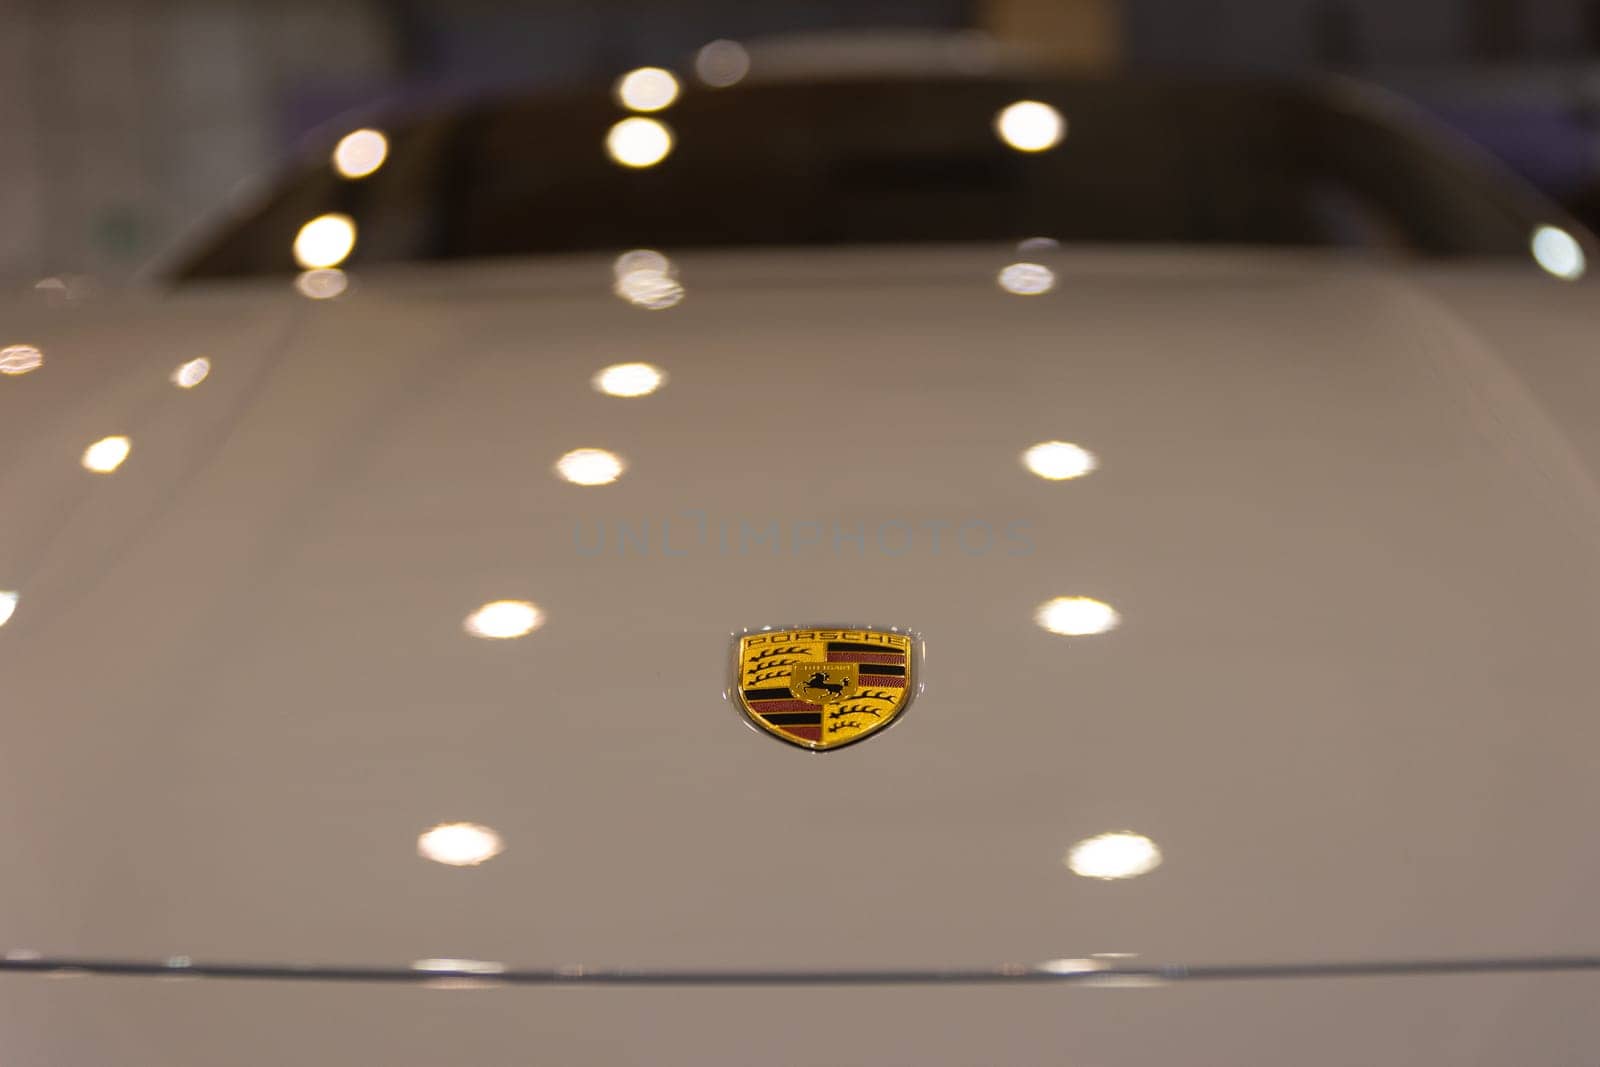 12 MAY 2023, Lisbon, Porugal, Electric car Show in International Fairy of Lisbon - A white car with a yellow emblem on it